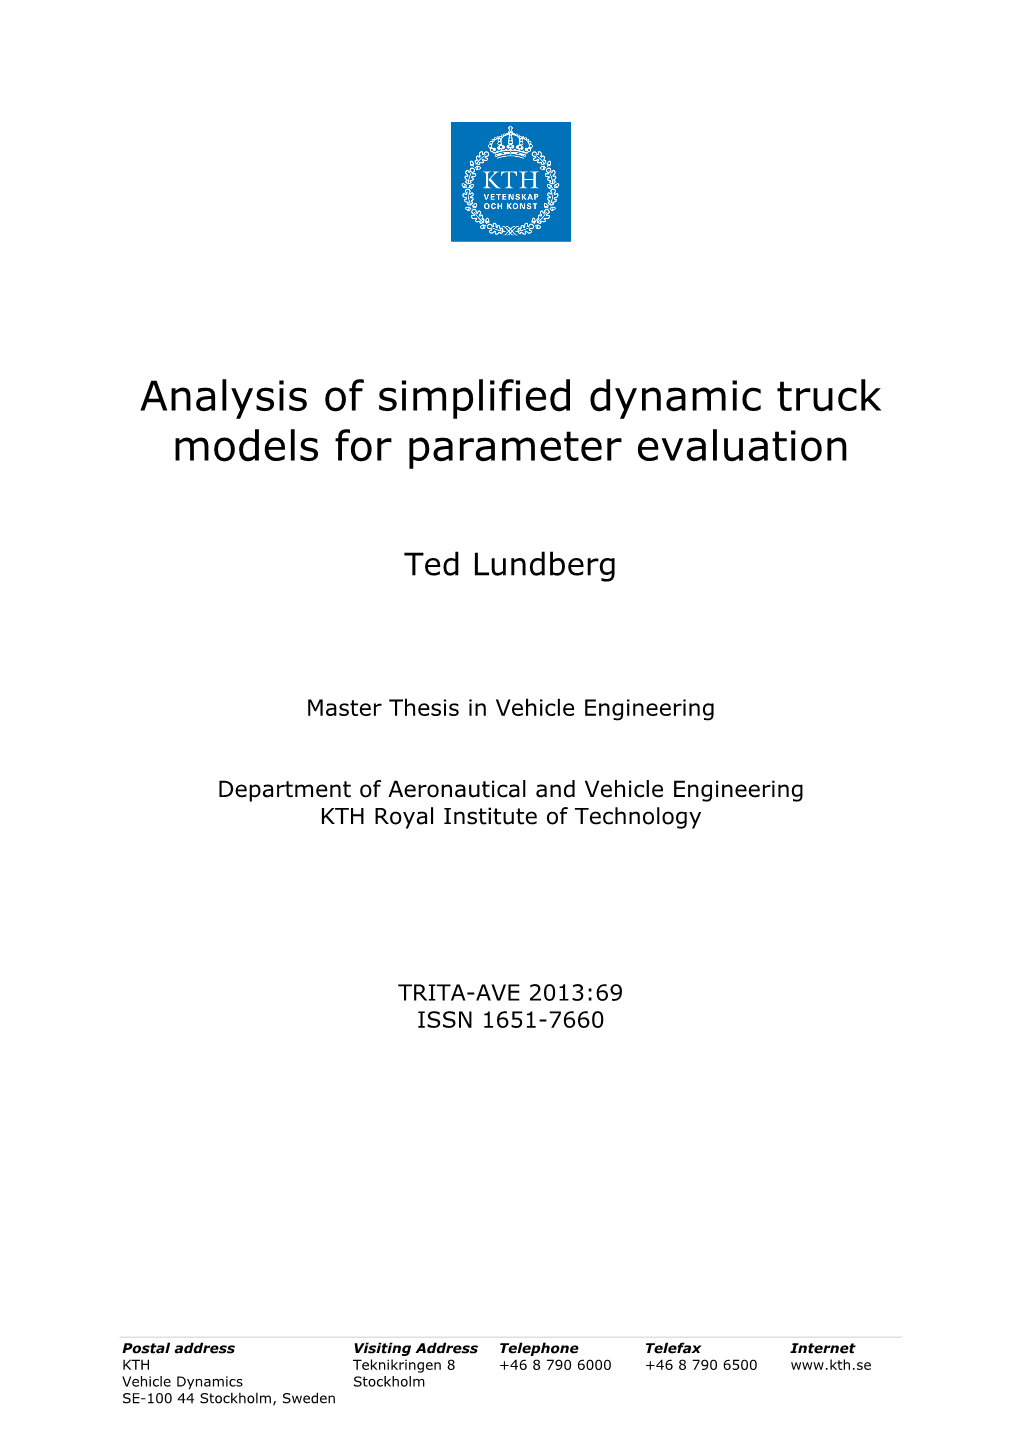 Analysis of Simplified Dynamic Truck Models for Parameter Evaluation